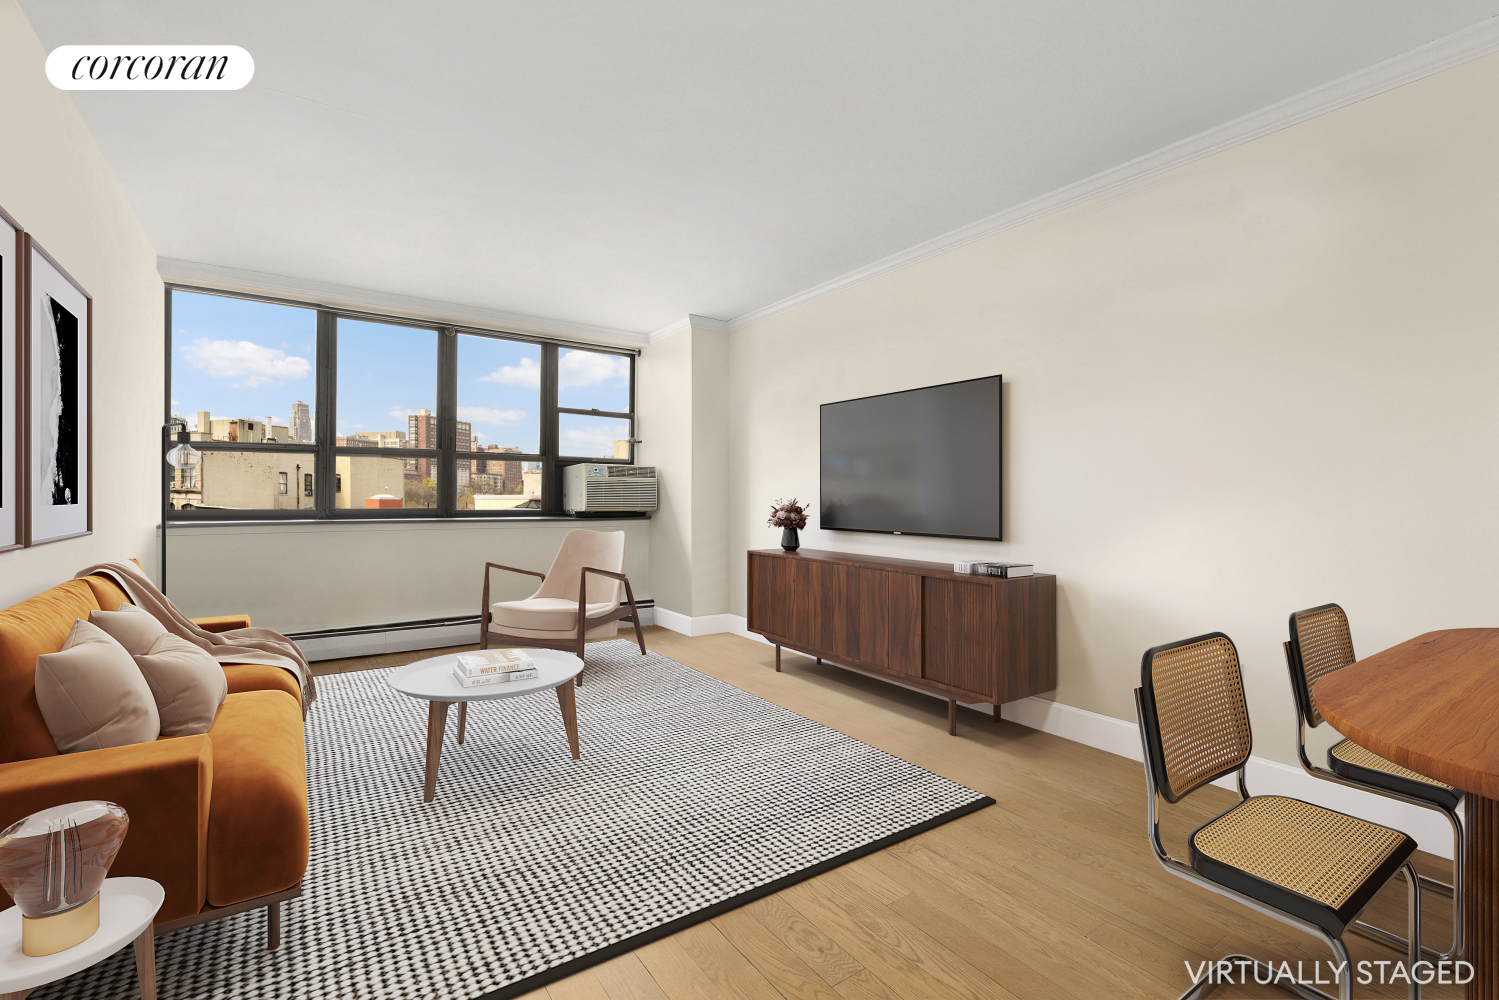 301 West 110th Street 6E, South Harlem, Upper Manhattan, NYC - 1 Bedrooms  
1 Bathrooms  
4 Rooms - 